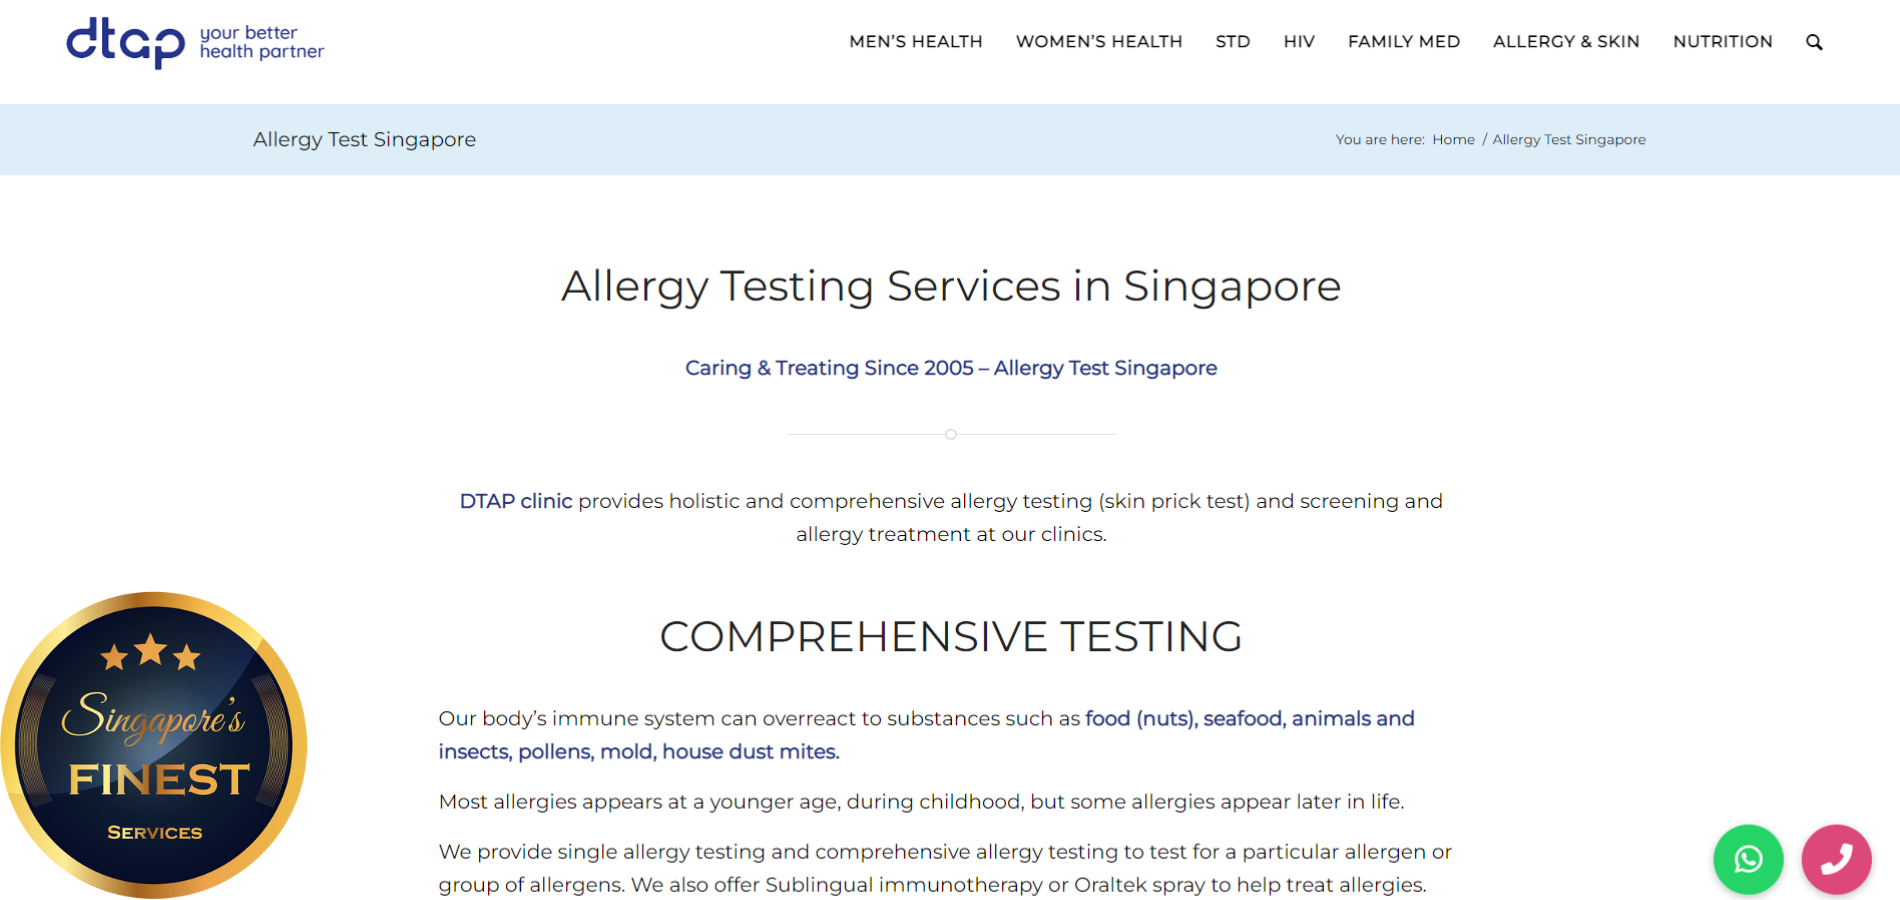 The Finest Clinics for Allergy Test in Singapore